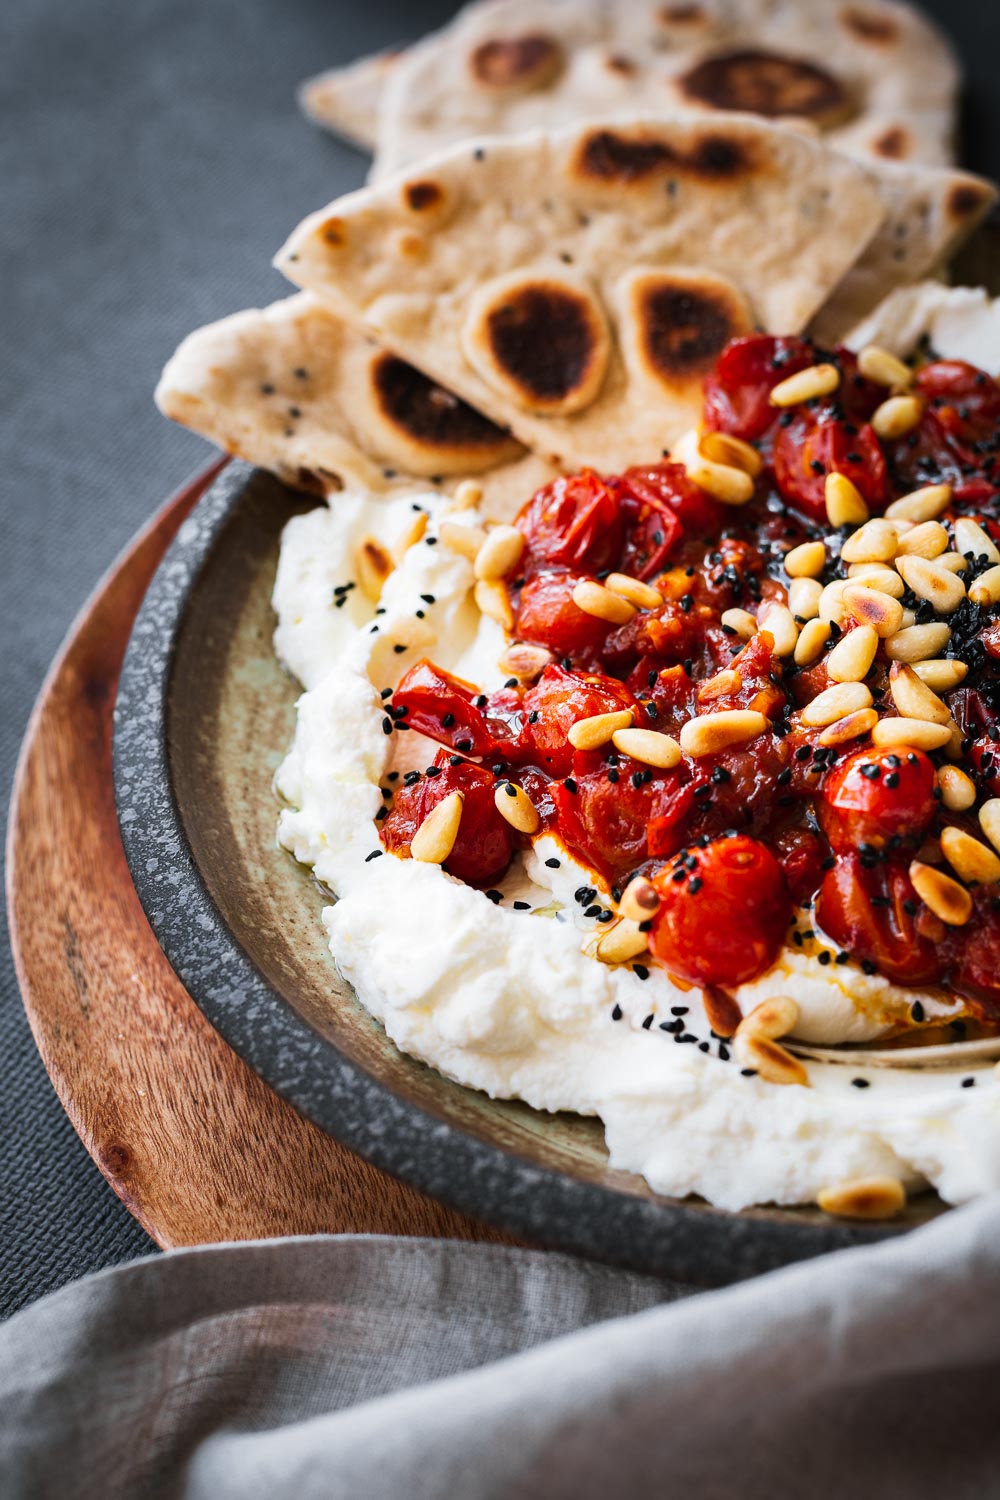 Labneh Dip With Harissa-Spiced Tomato Sauce